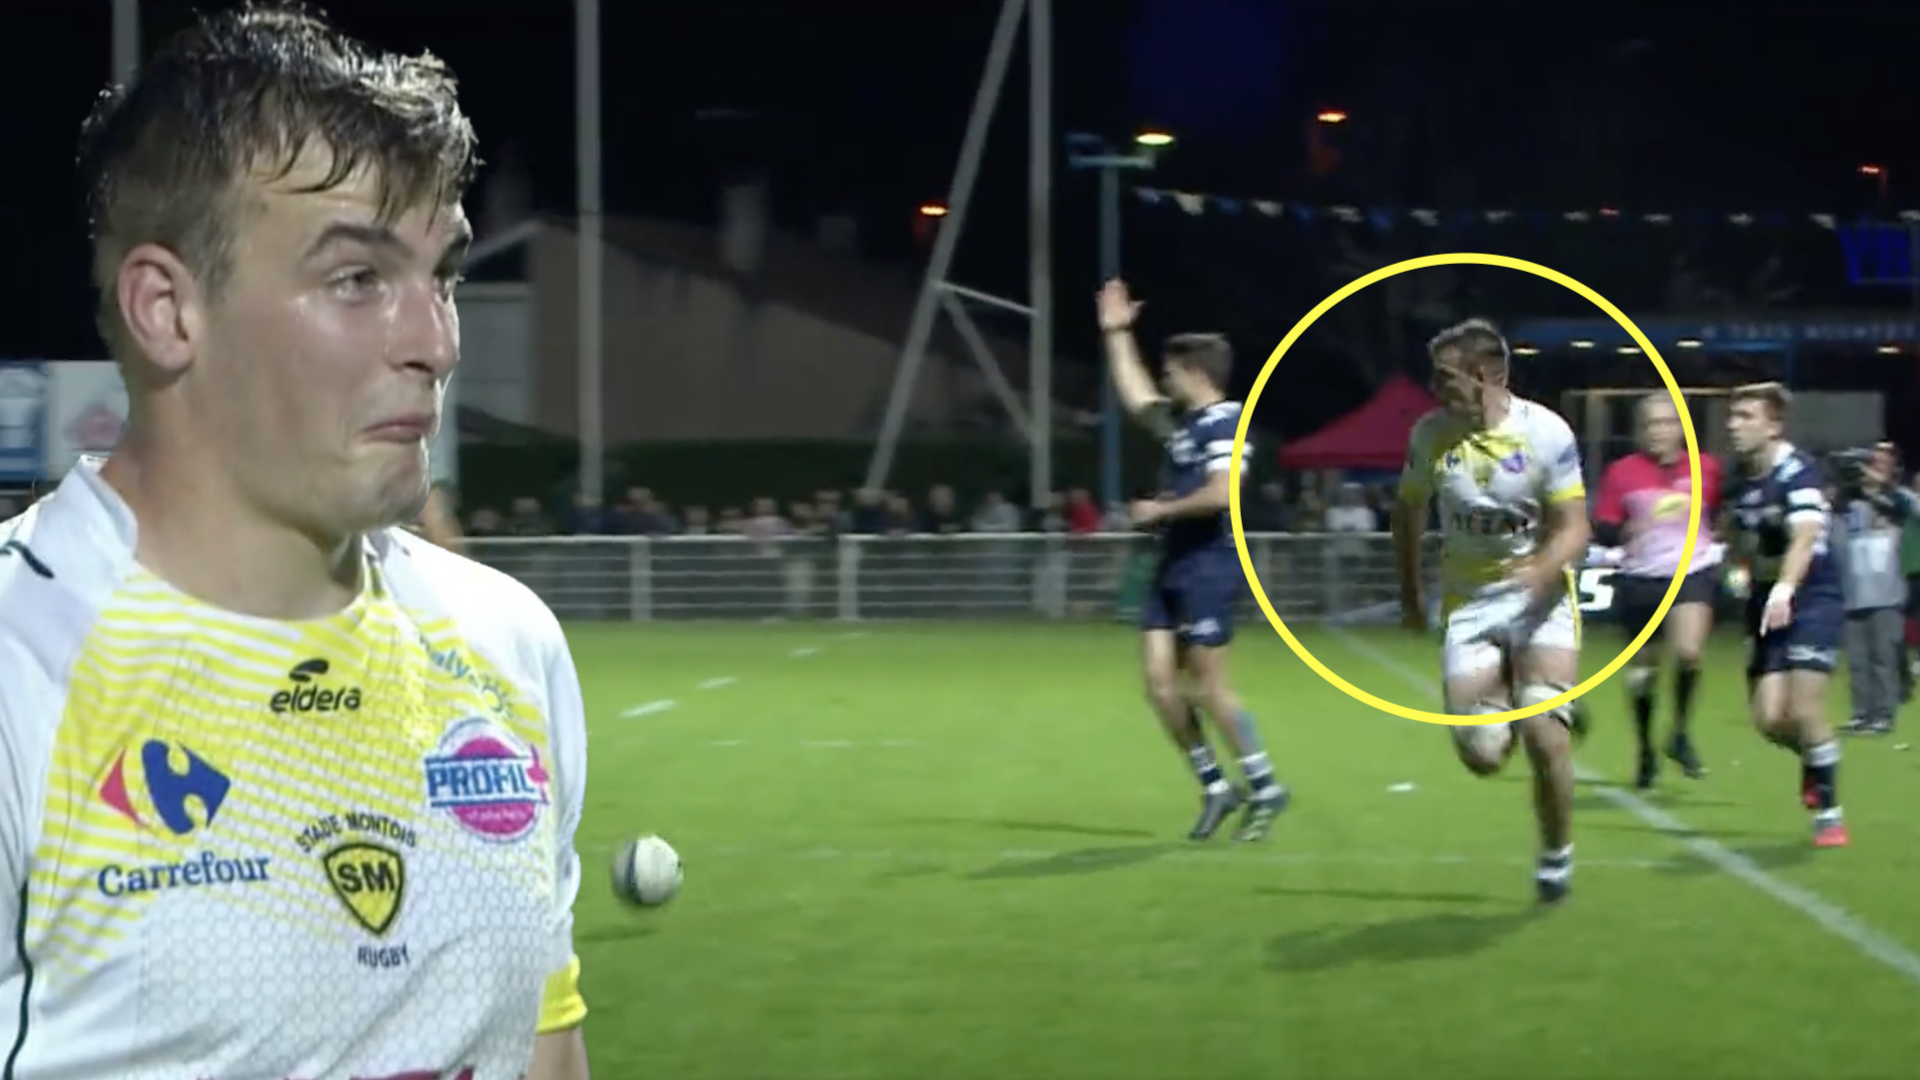 This one-in-a-million try is guaranteed never to be seen again